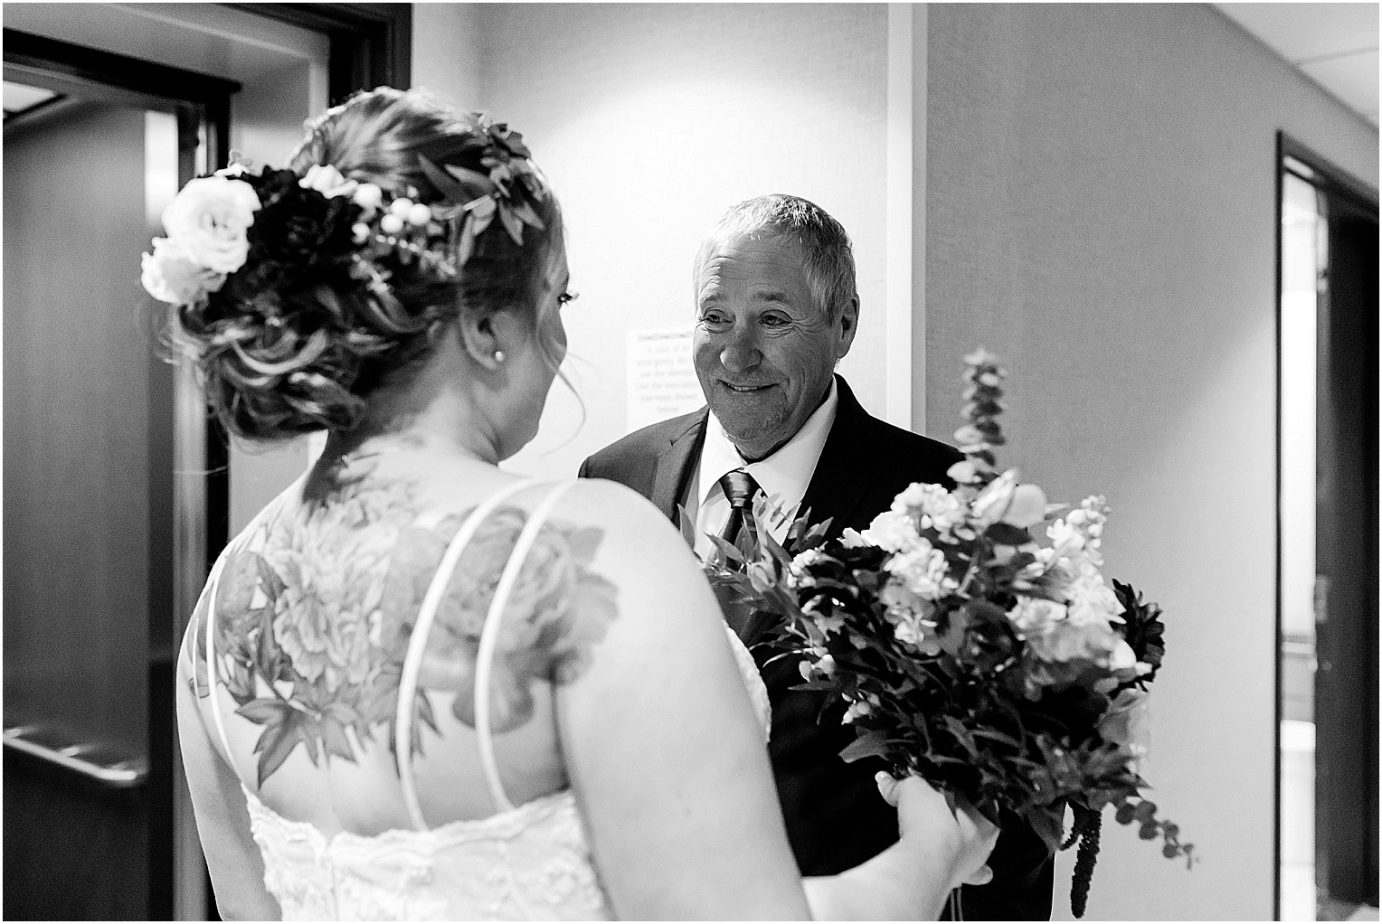 Courtyard by Marriot Ricland wedding richland wa jeff and maddi first look with dad